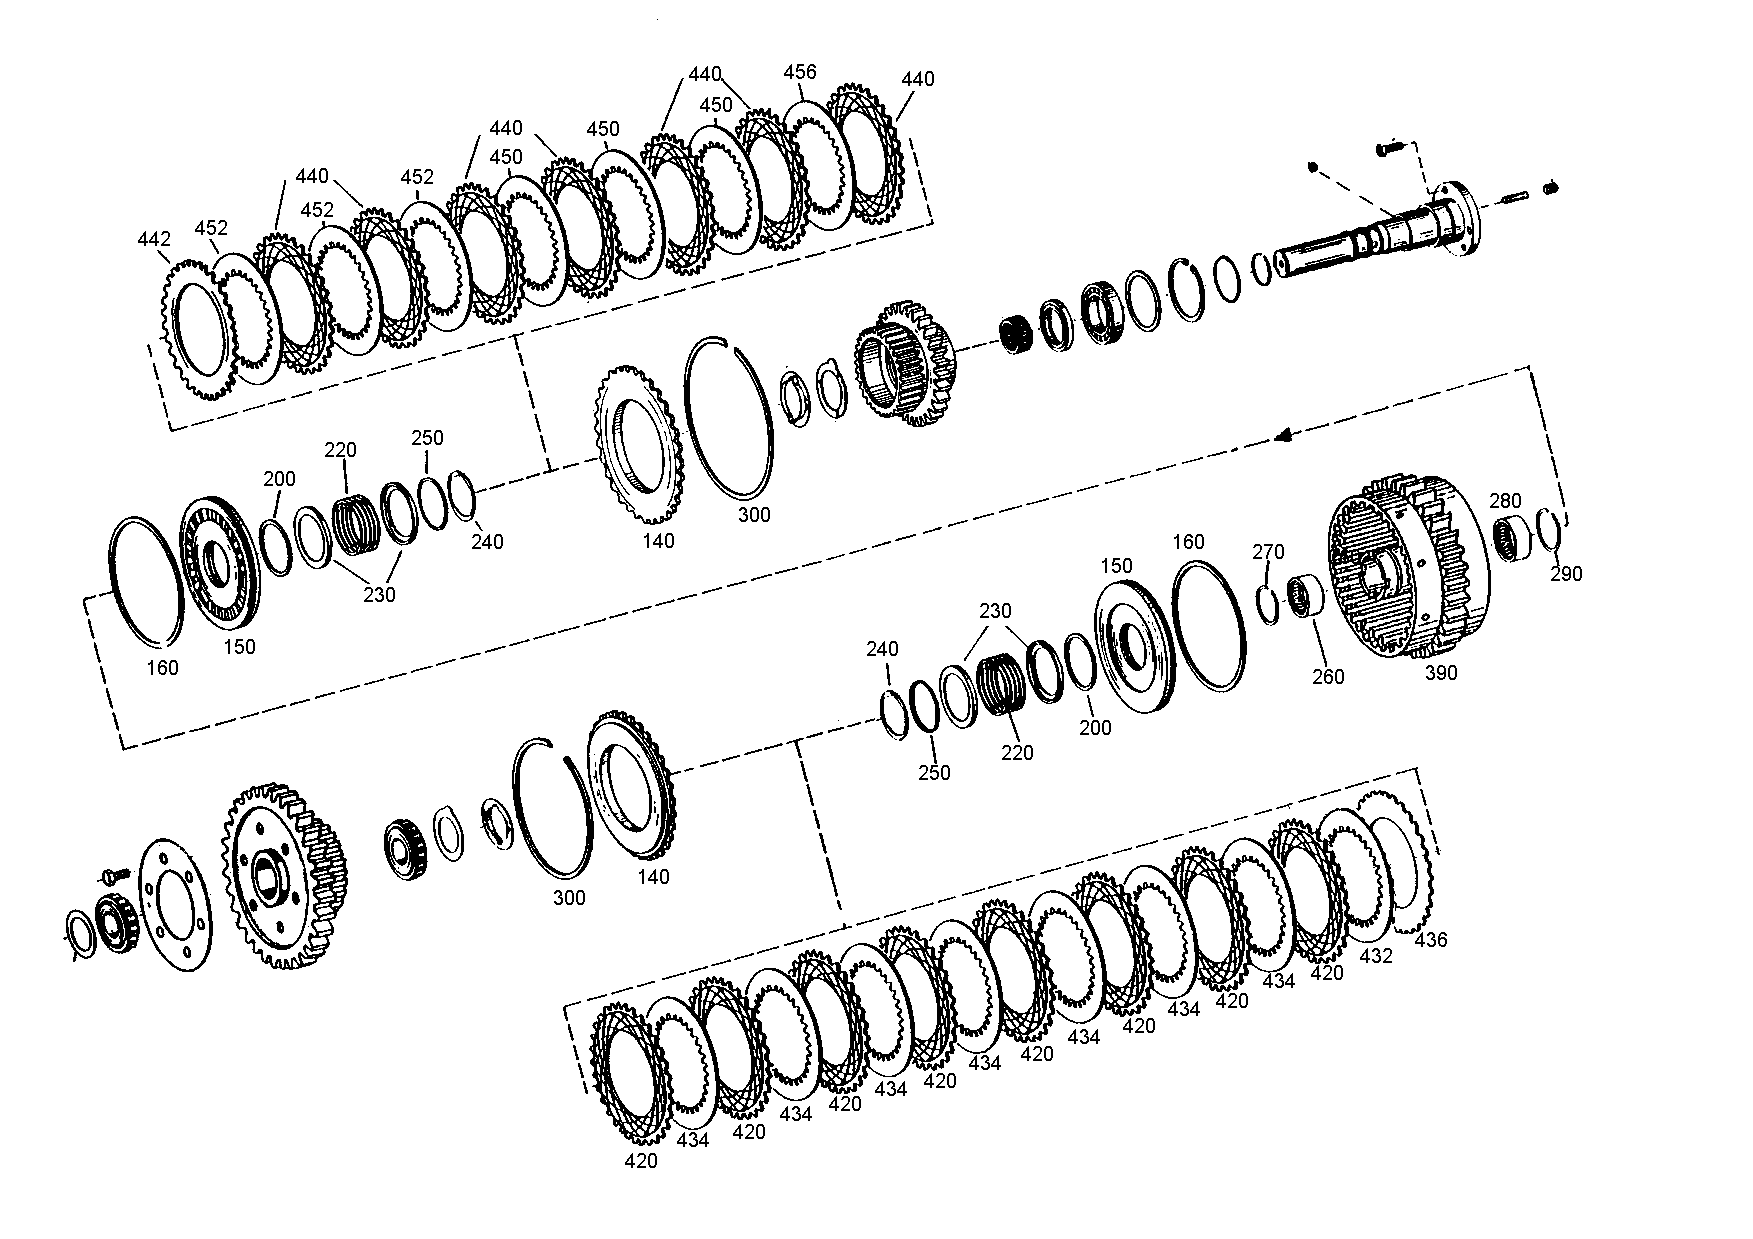 drawing for PPM 5904662350 - SNAP RING (figure 4)